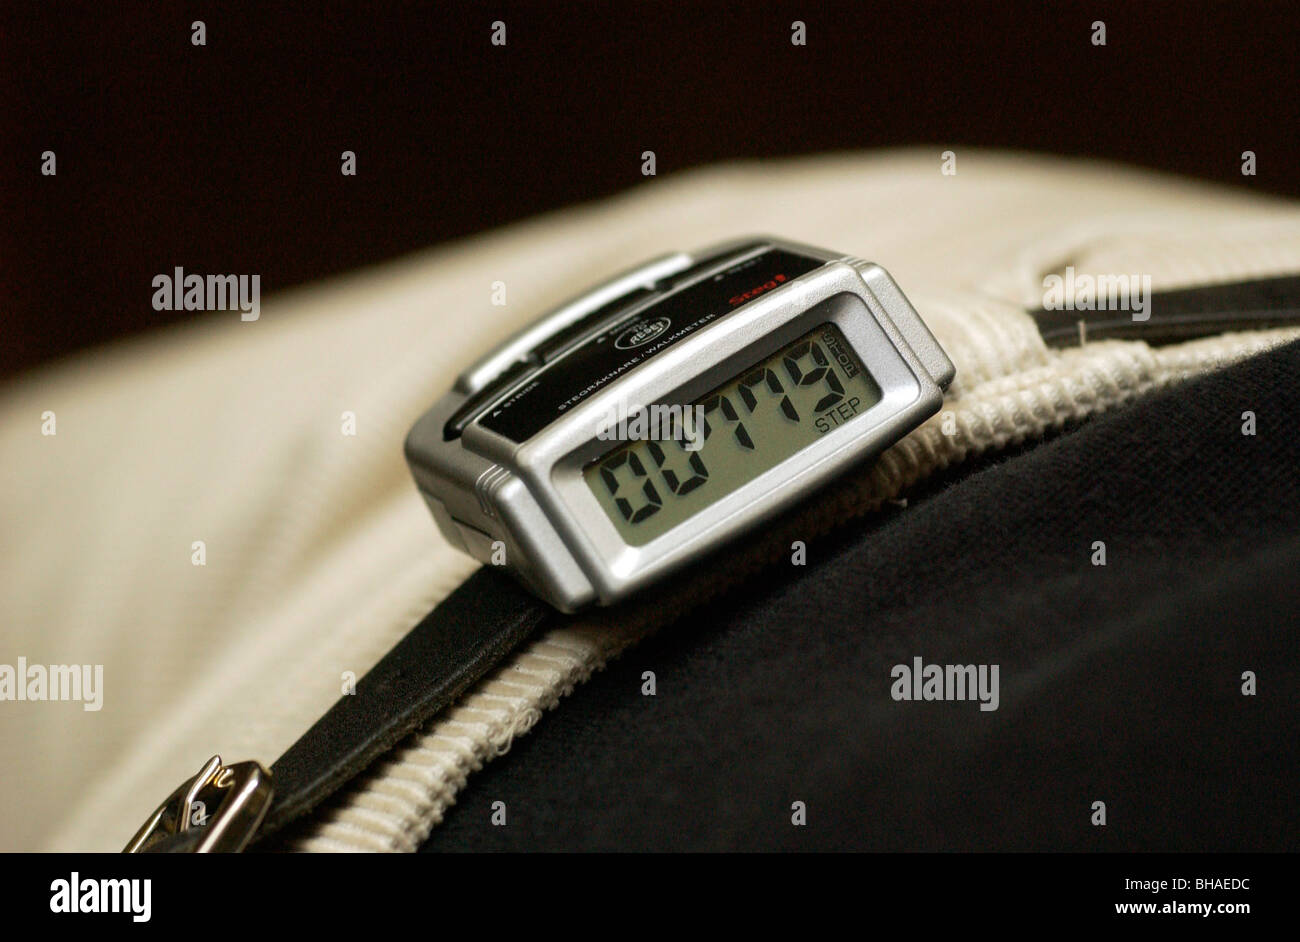 Step counter or pedometer Stock Photo